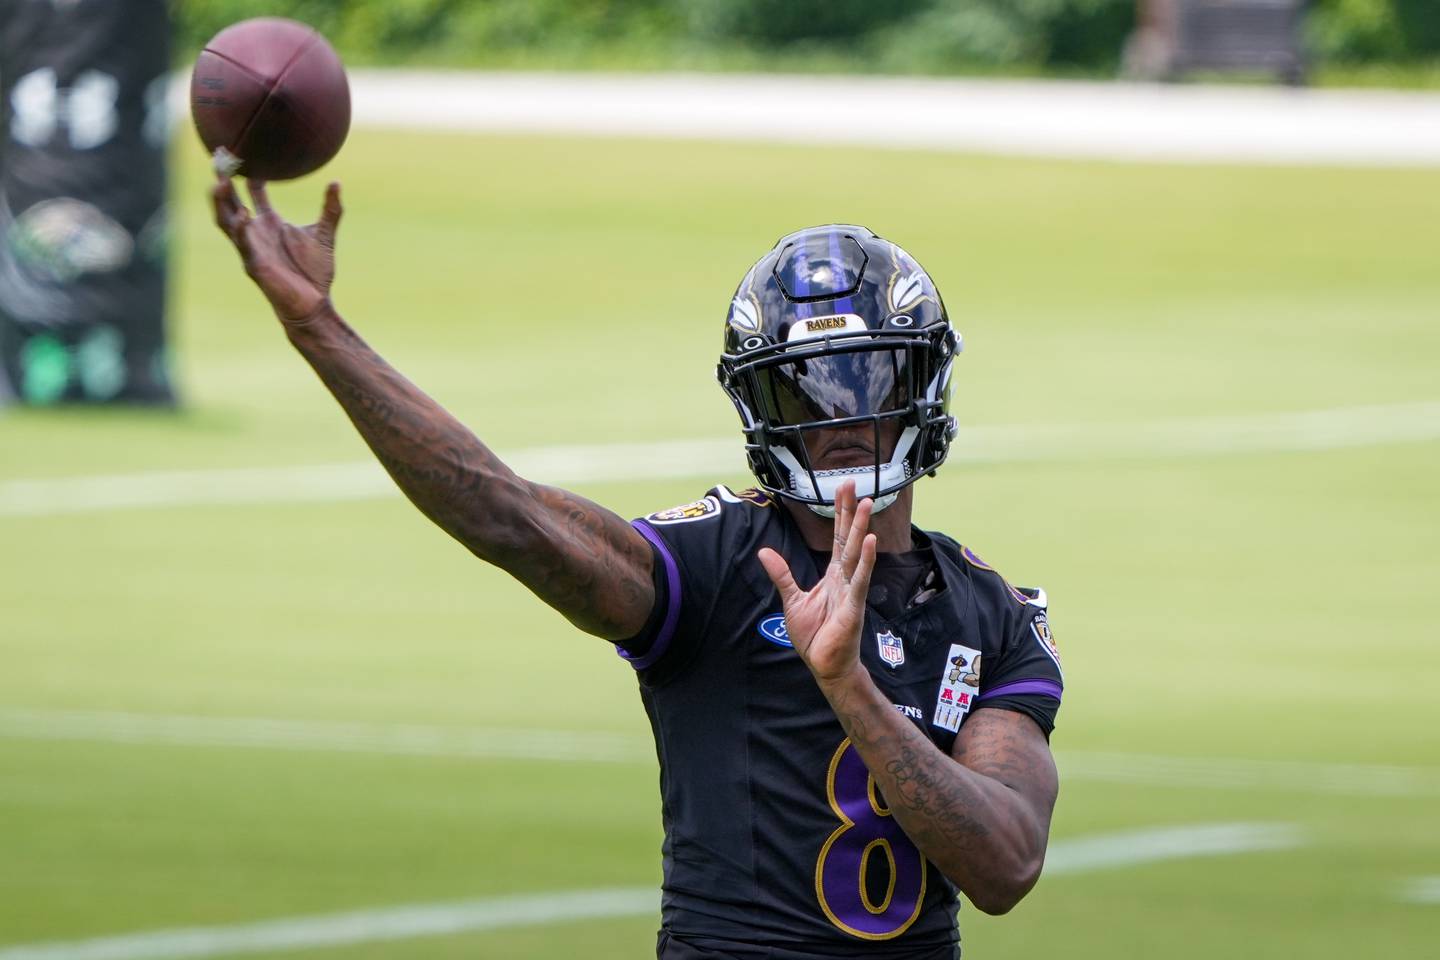 Ravens minicamp report: Why Lamar Jackson’s newest weapon could be his voice